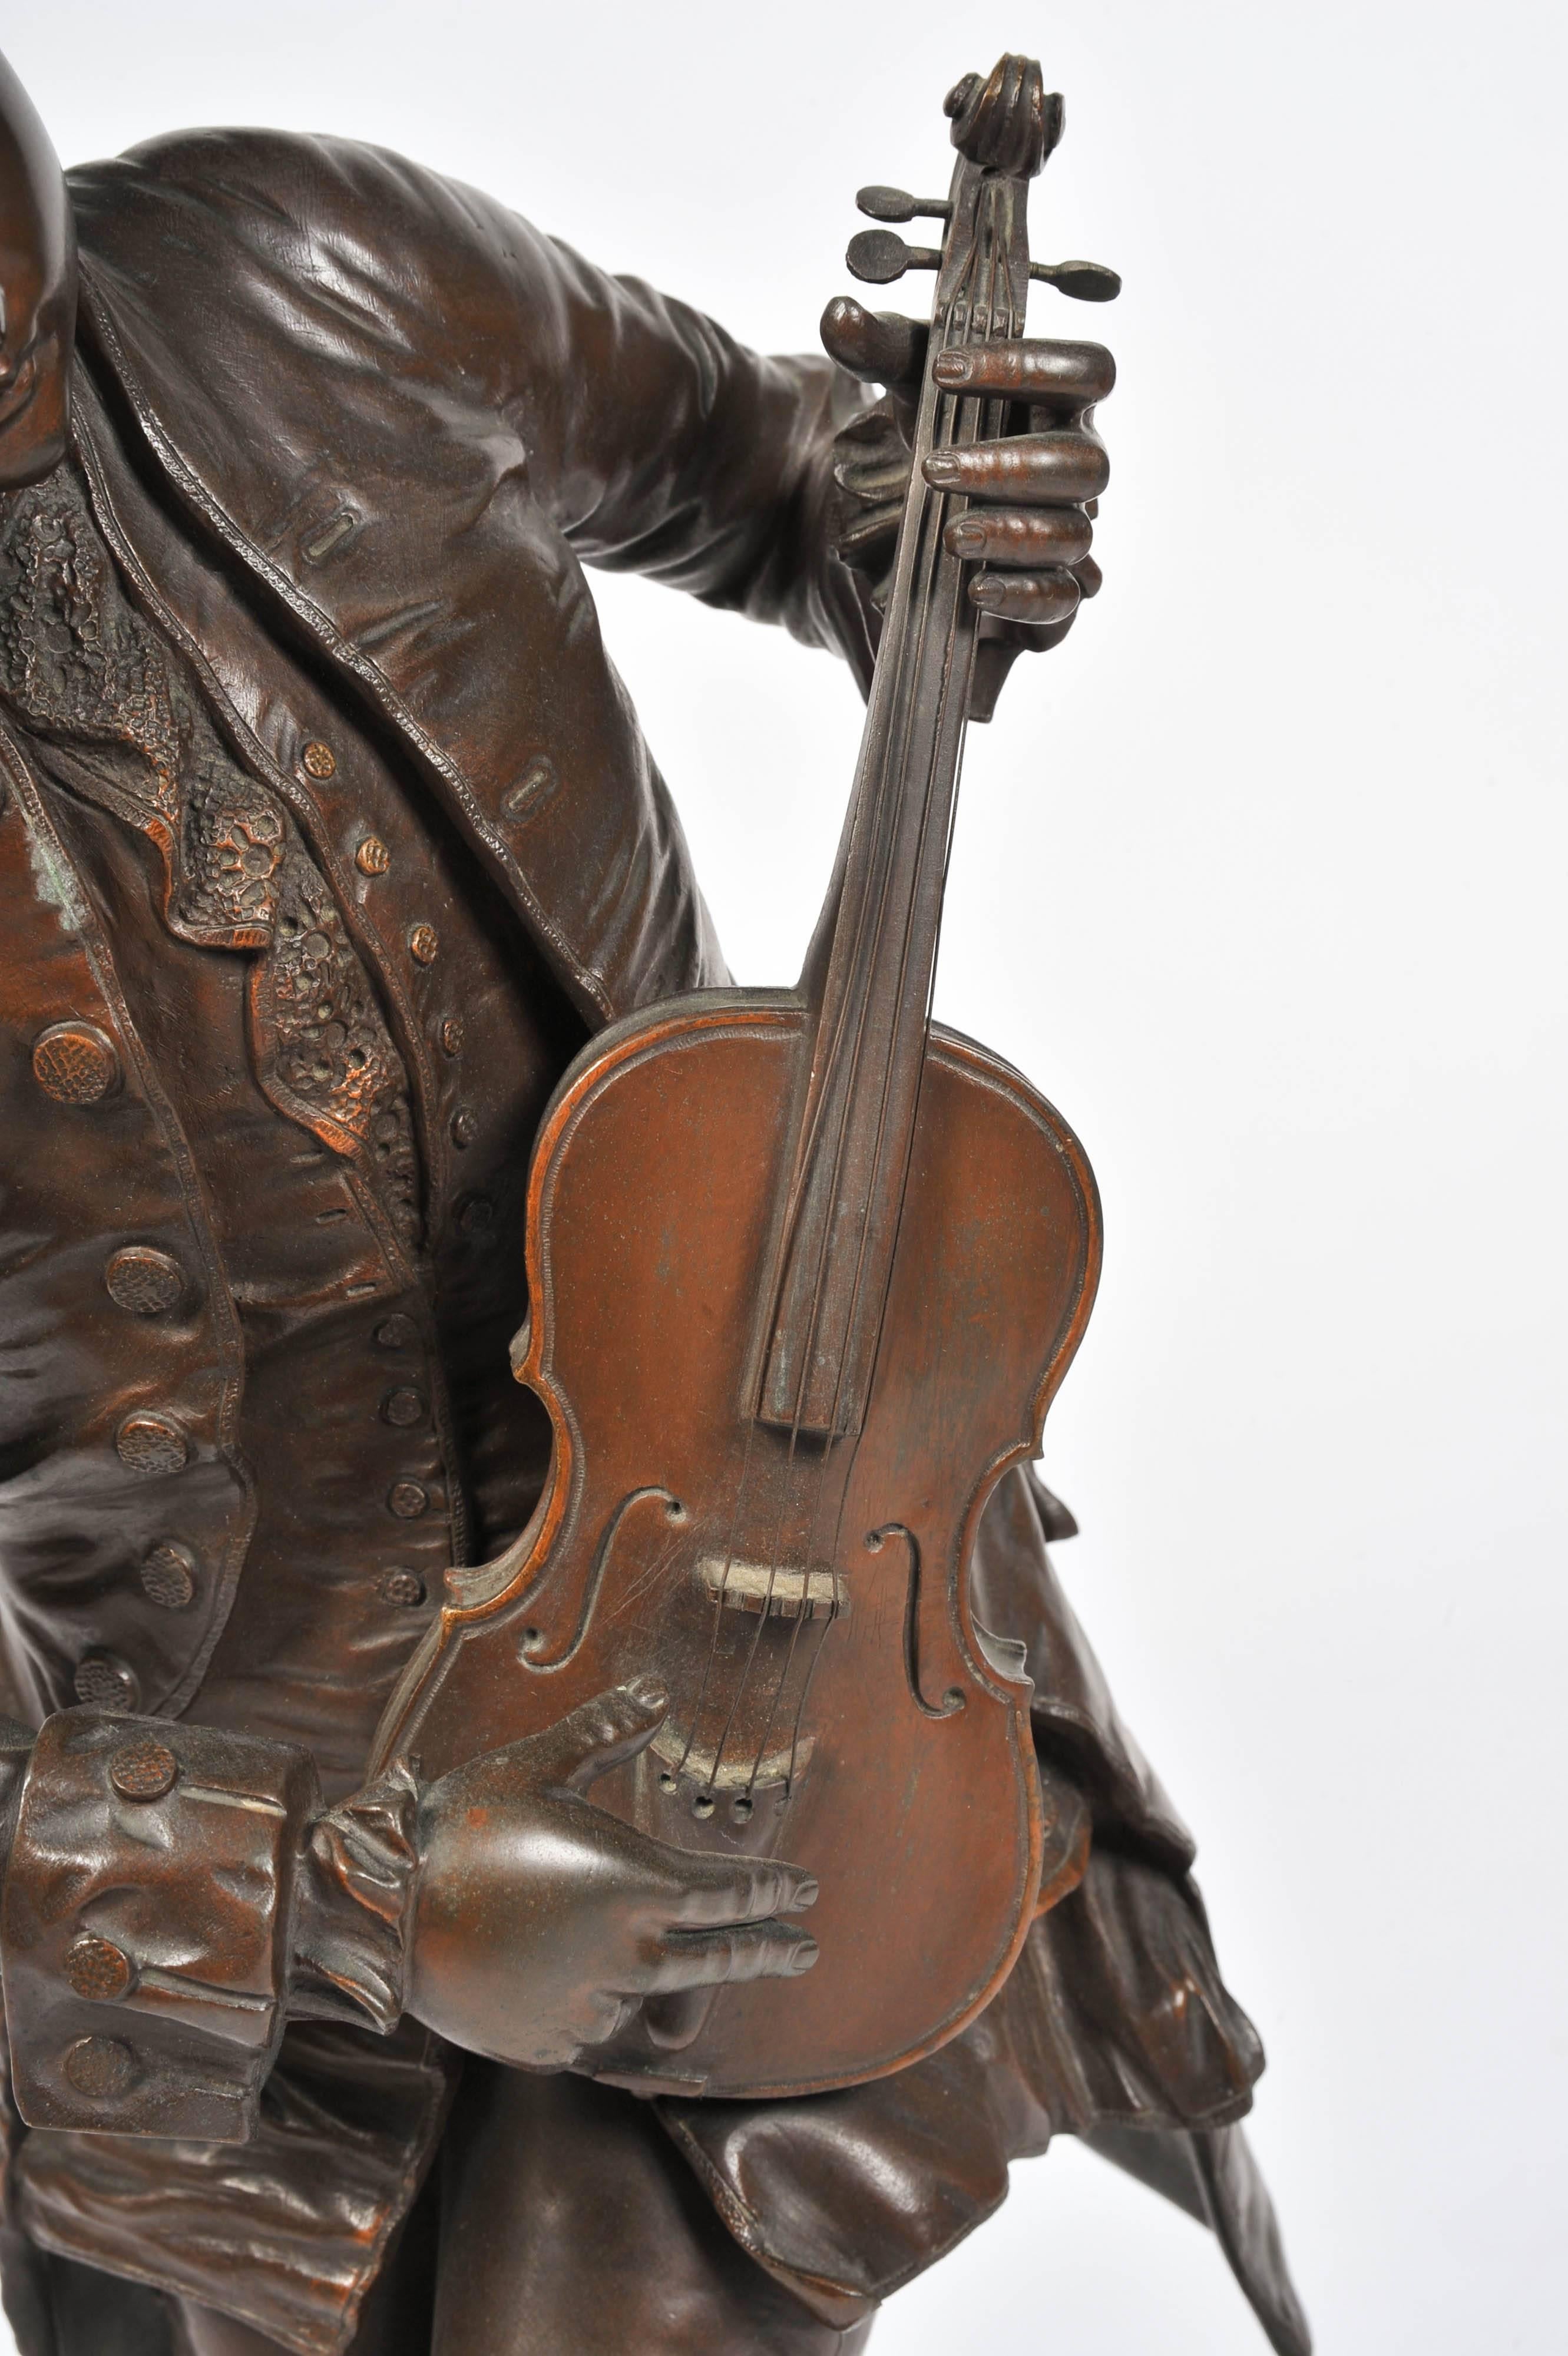 A very good quality 19th century bronze statue of Mozart playing a Violin.